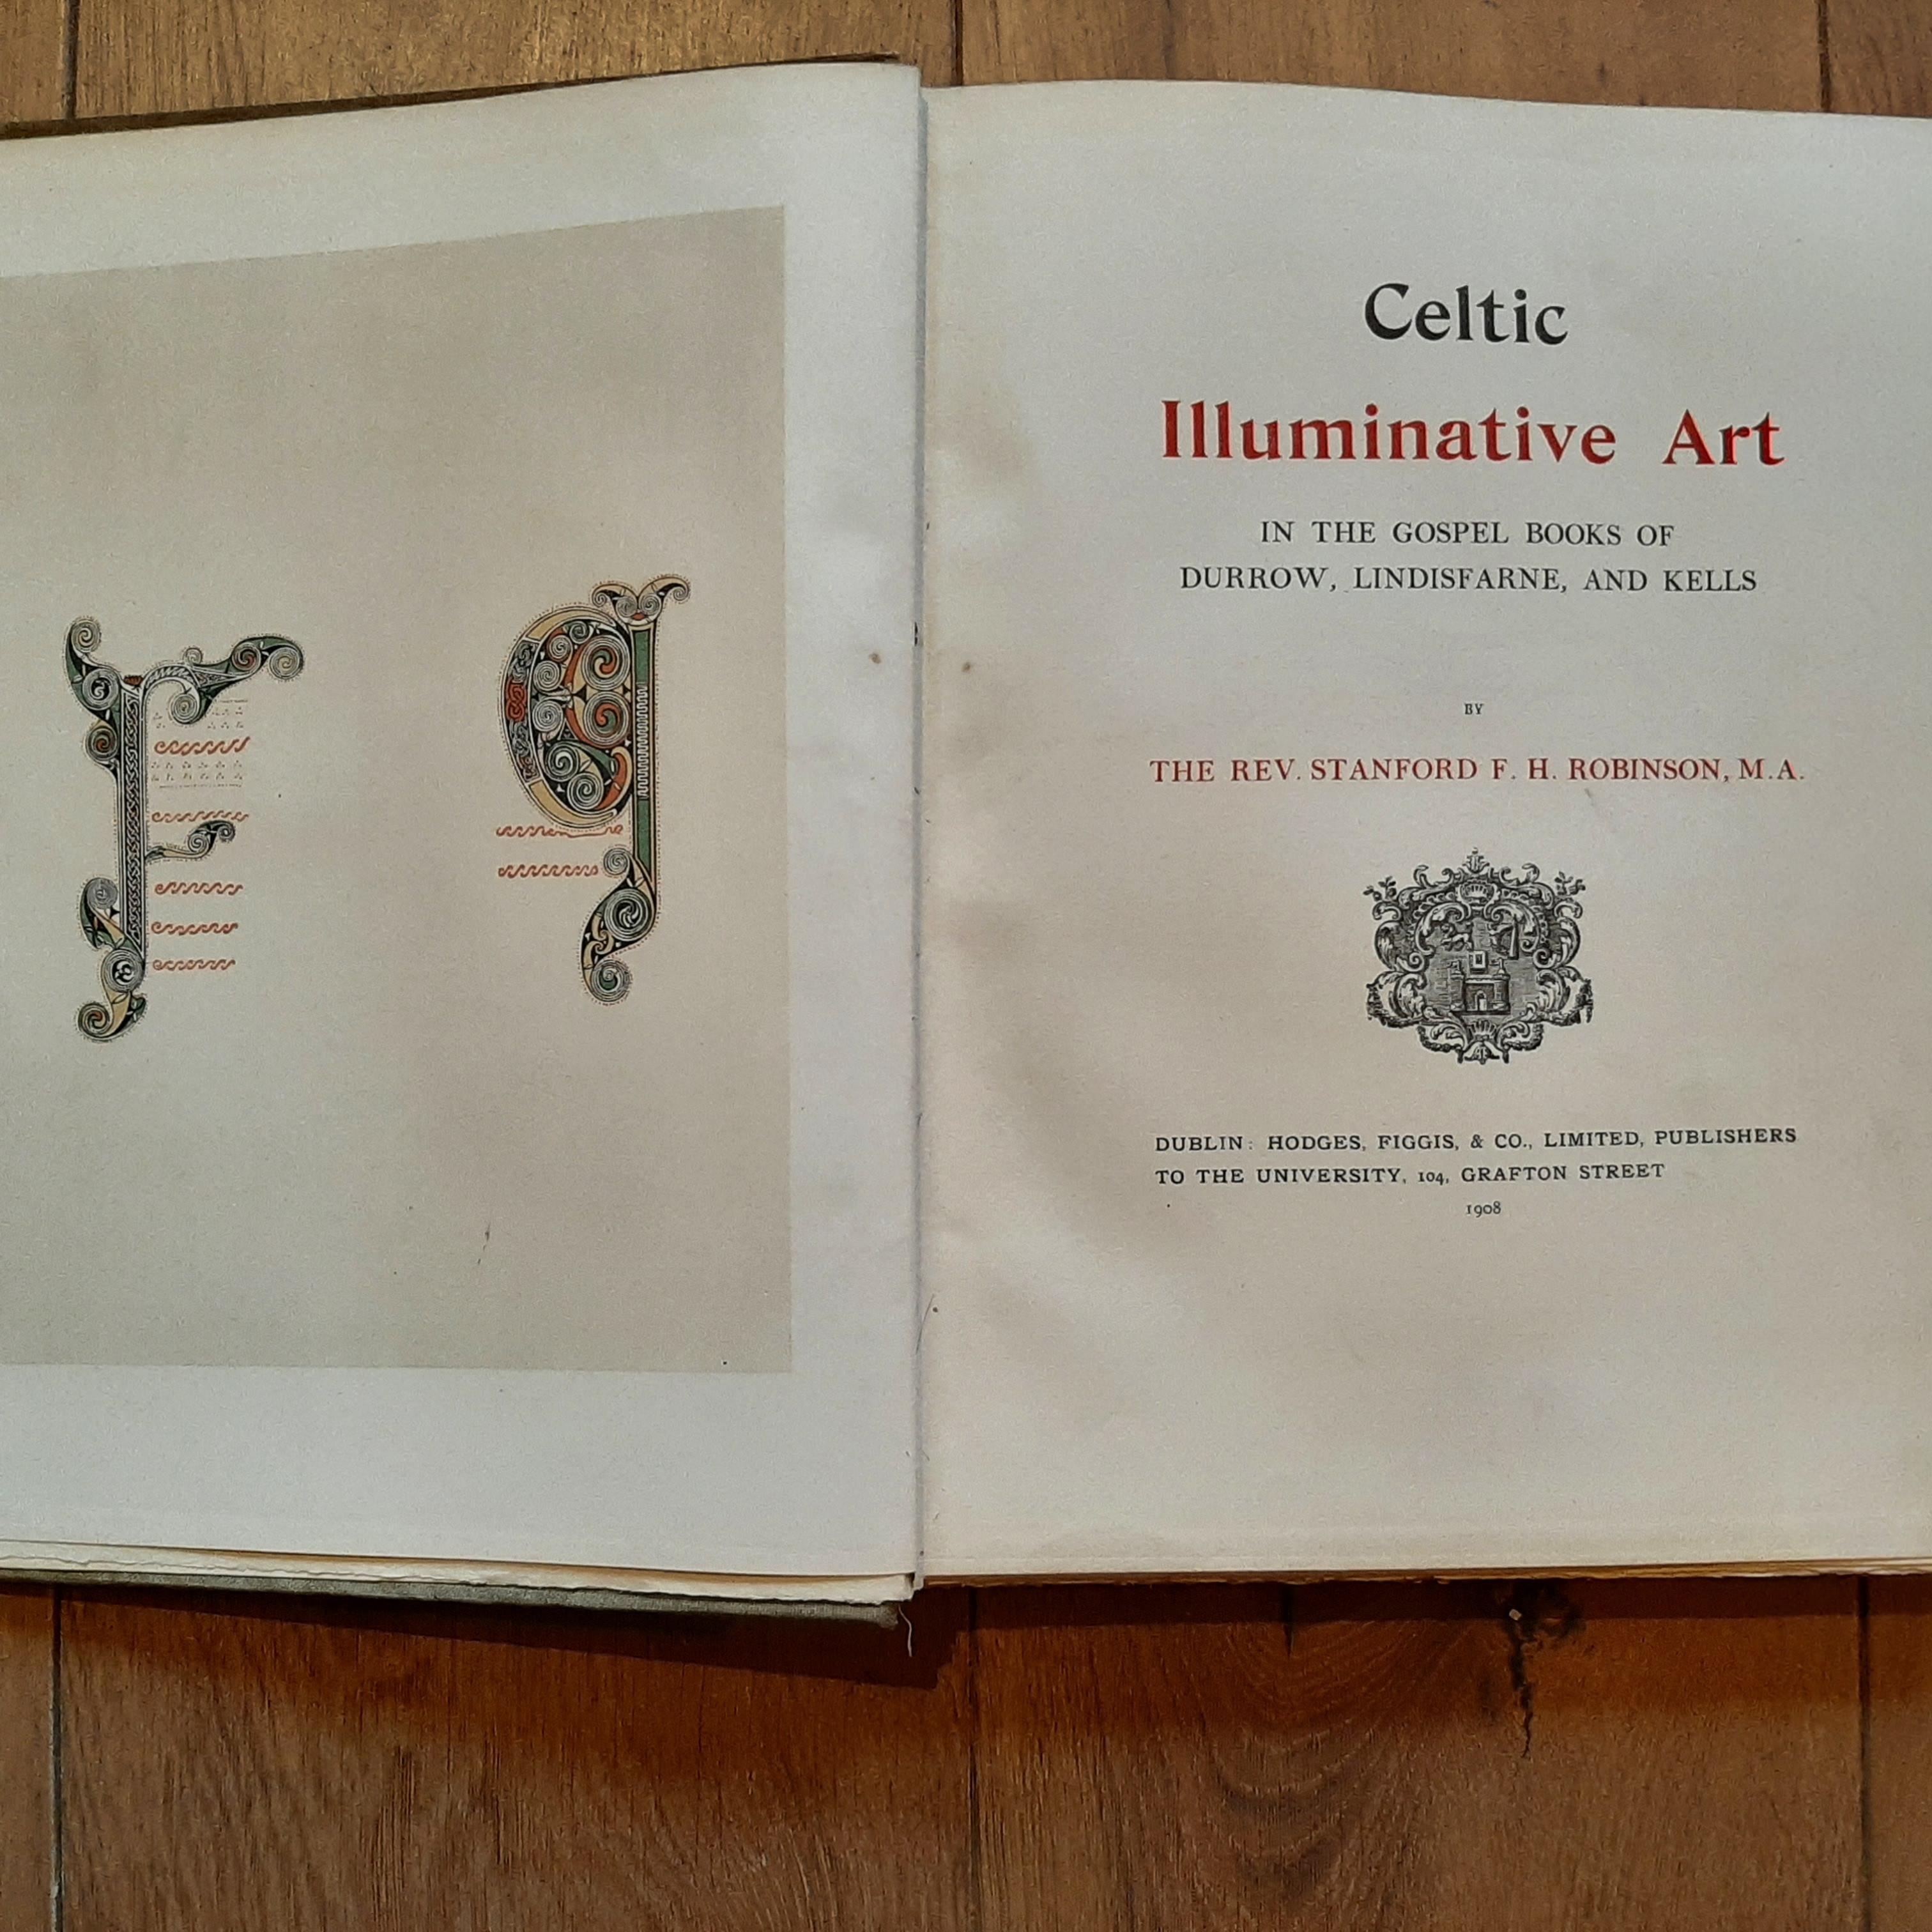 'Celtic Illuminative Art in the gospel books of Durrow, Lindisfarne, and Kells' by the Rev. Stanford F.H. Robinson, M.A. Published 1908. 51 plates, each with cover page and text description. Some plates in color. Original cloth with elaborate Celtic